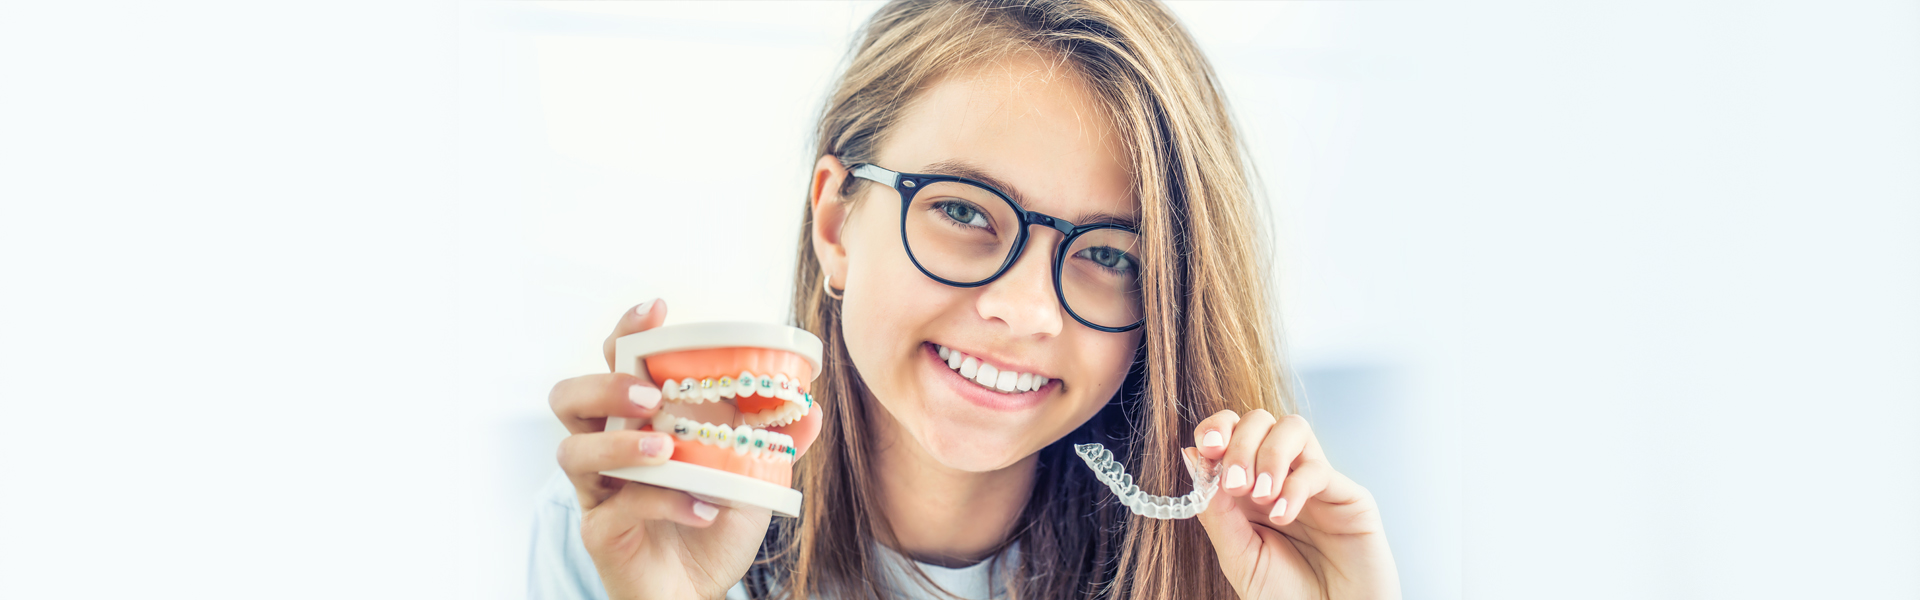 Is Life With Braces Difficult? Here’s What You Need to Know